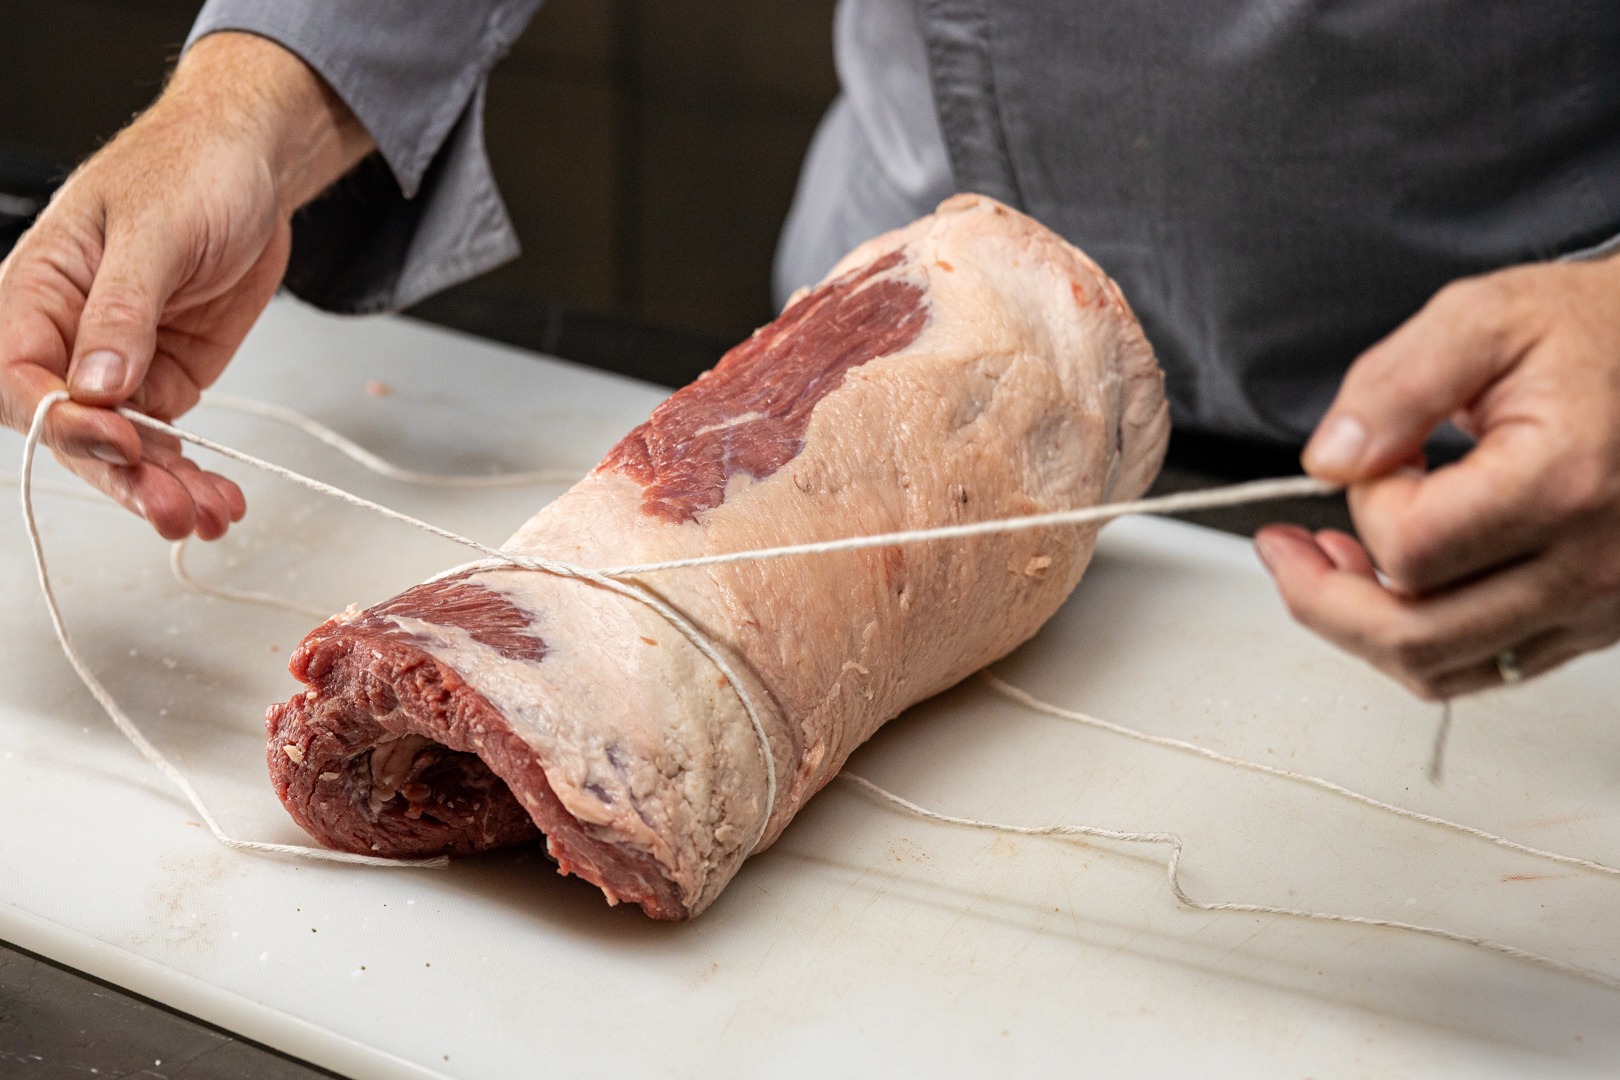 tying the rolled brisket